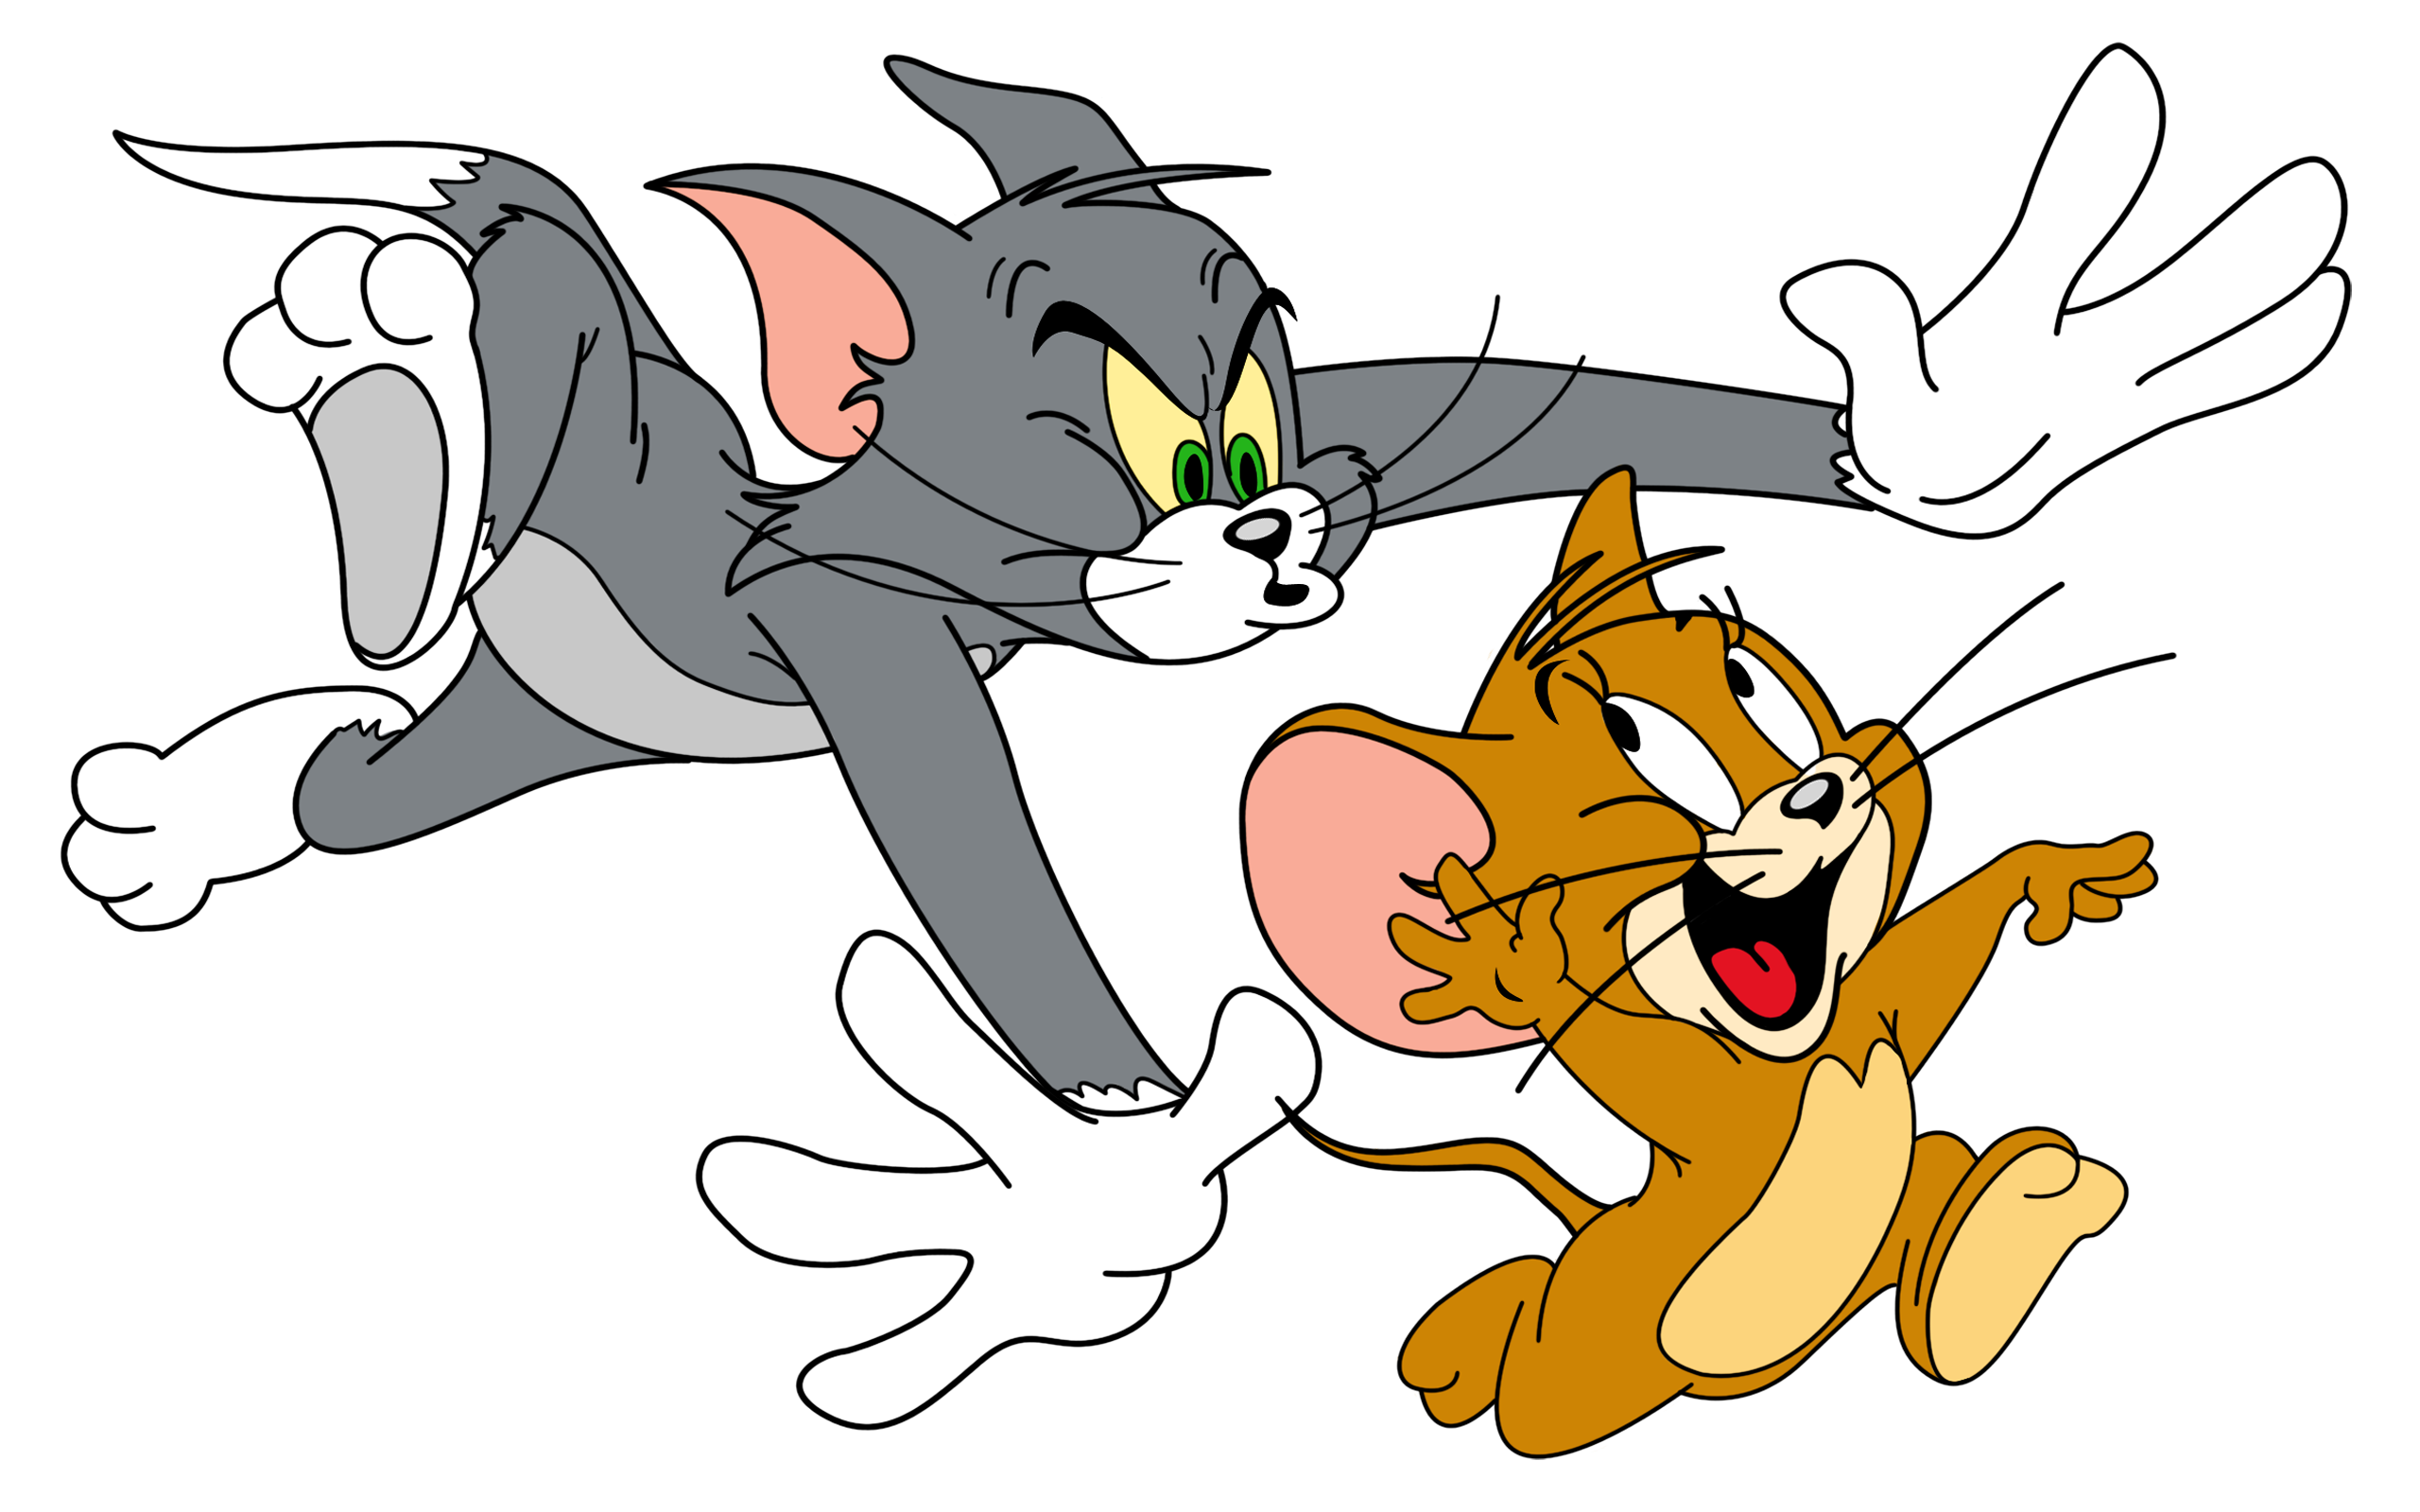 Tom And Jerry Art Image Hd Wallpaper For Desktop 2560x1600 :  